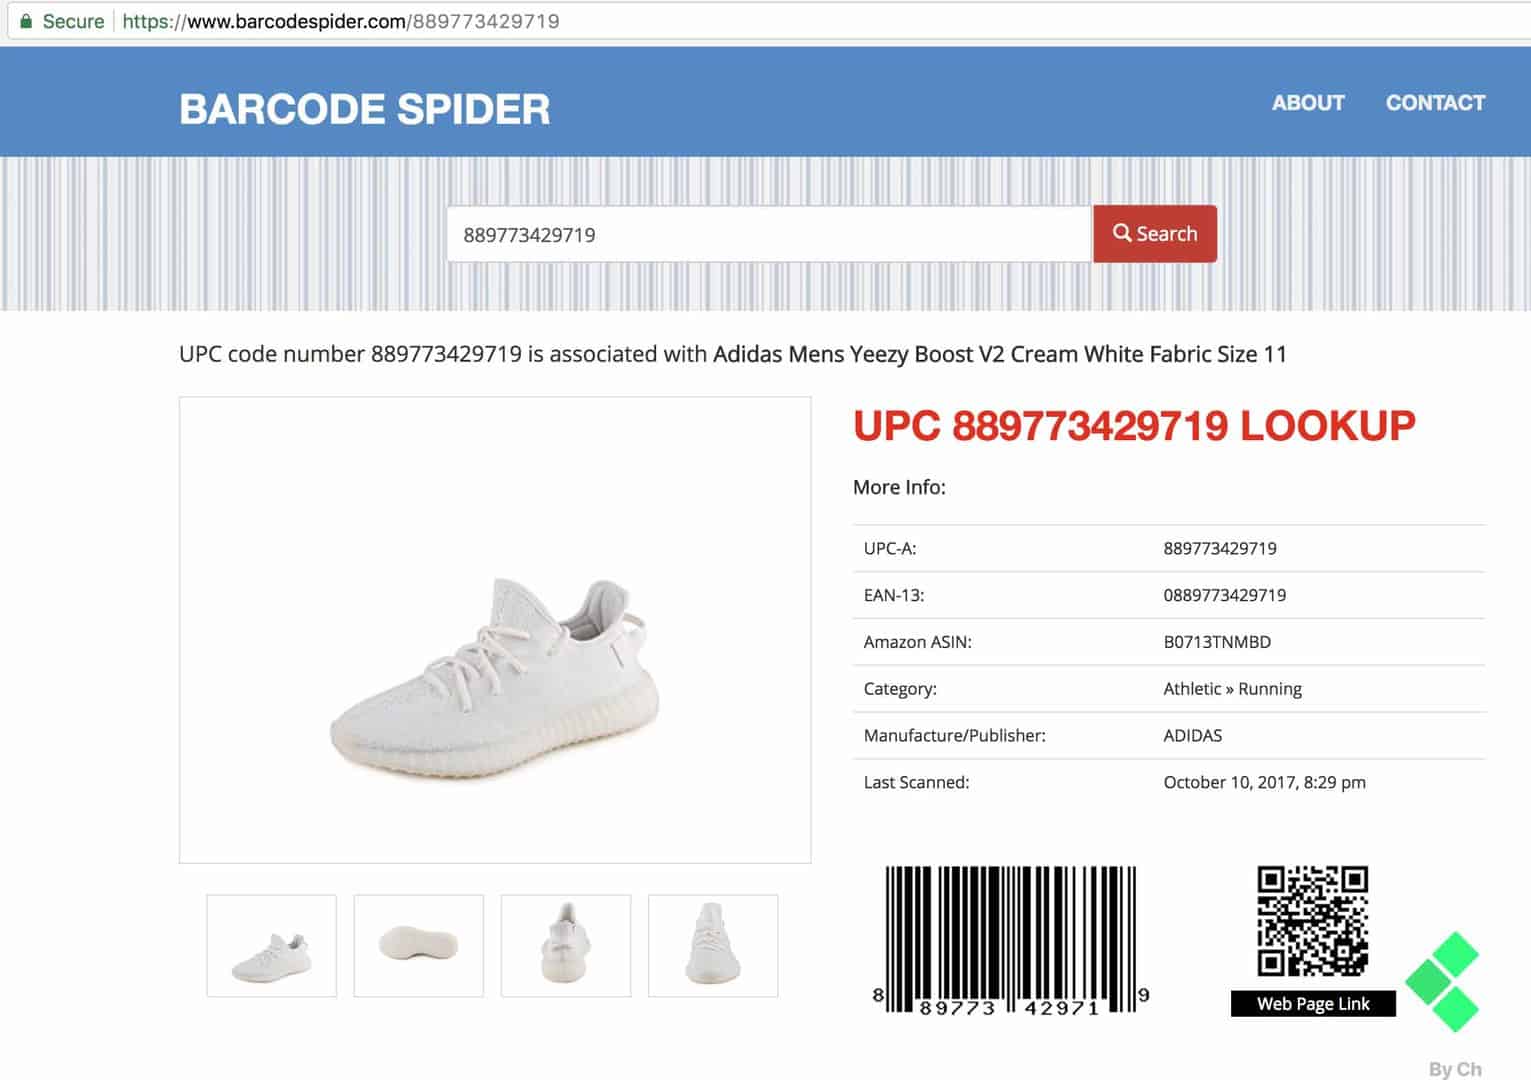 Nike Sneakers - The Barcode Scanner